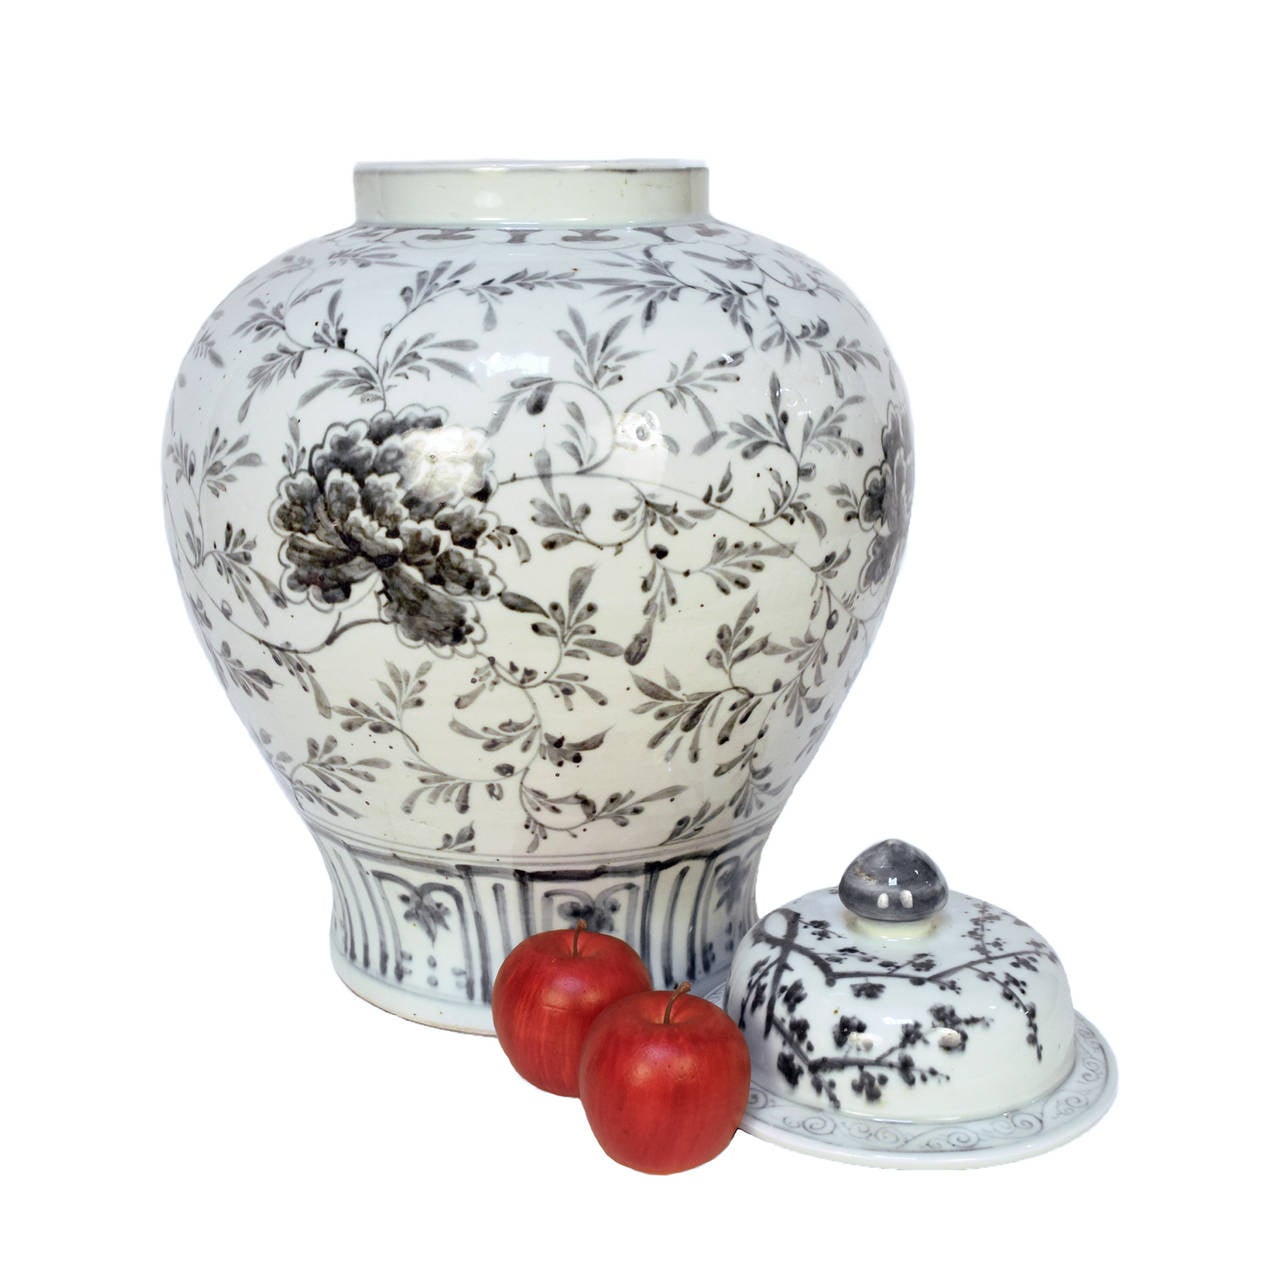 Ceramic jar with hand-painted charcoal color Shuo-yao (peony) flowers. In China, the peony is the “Queen of the Flowers” and an emblem of wealth and distinction.